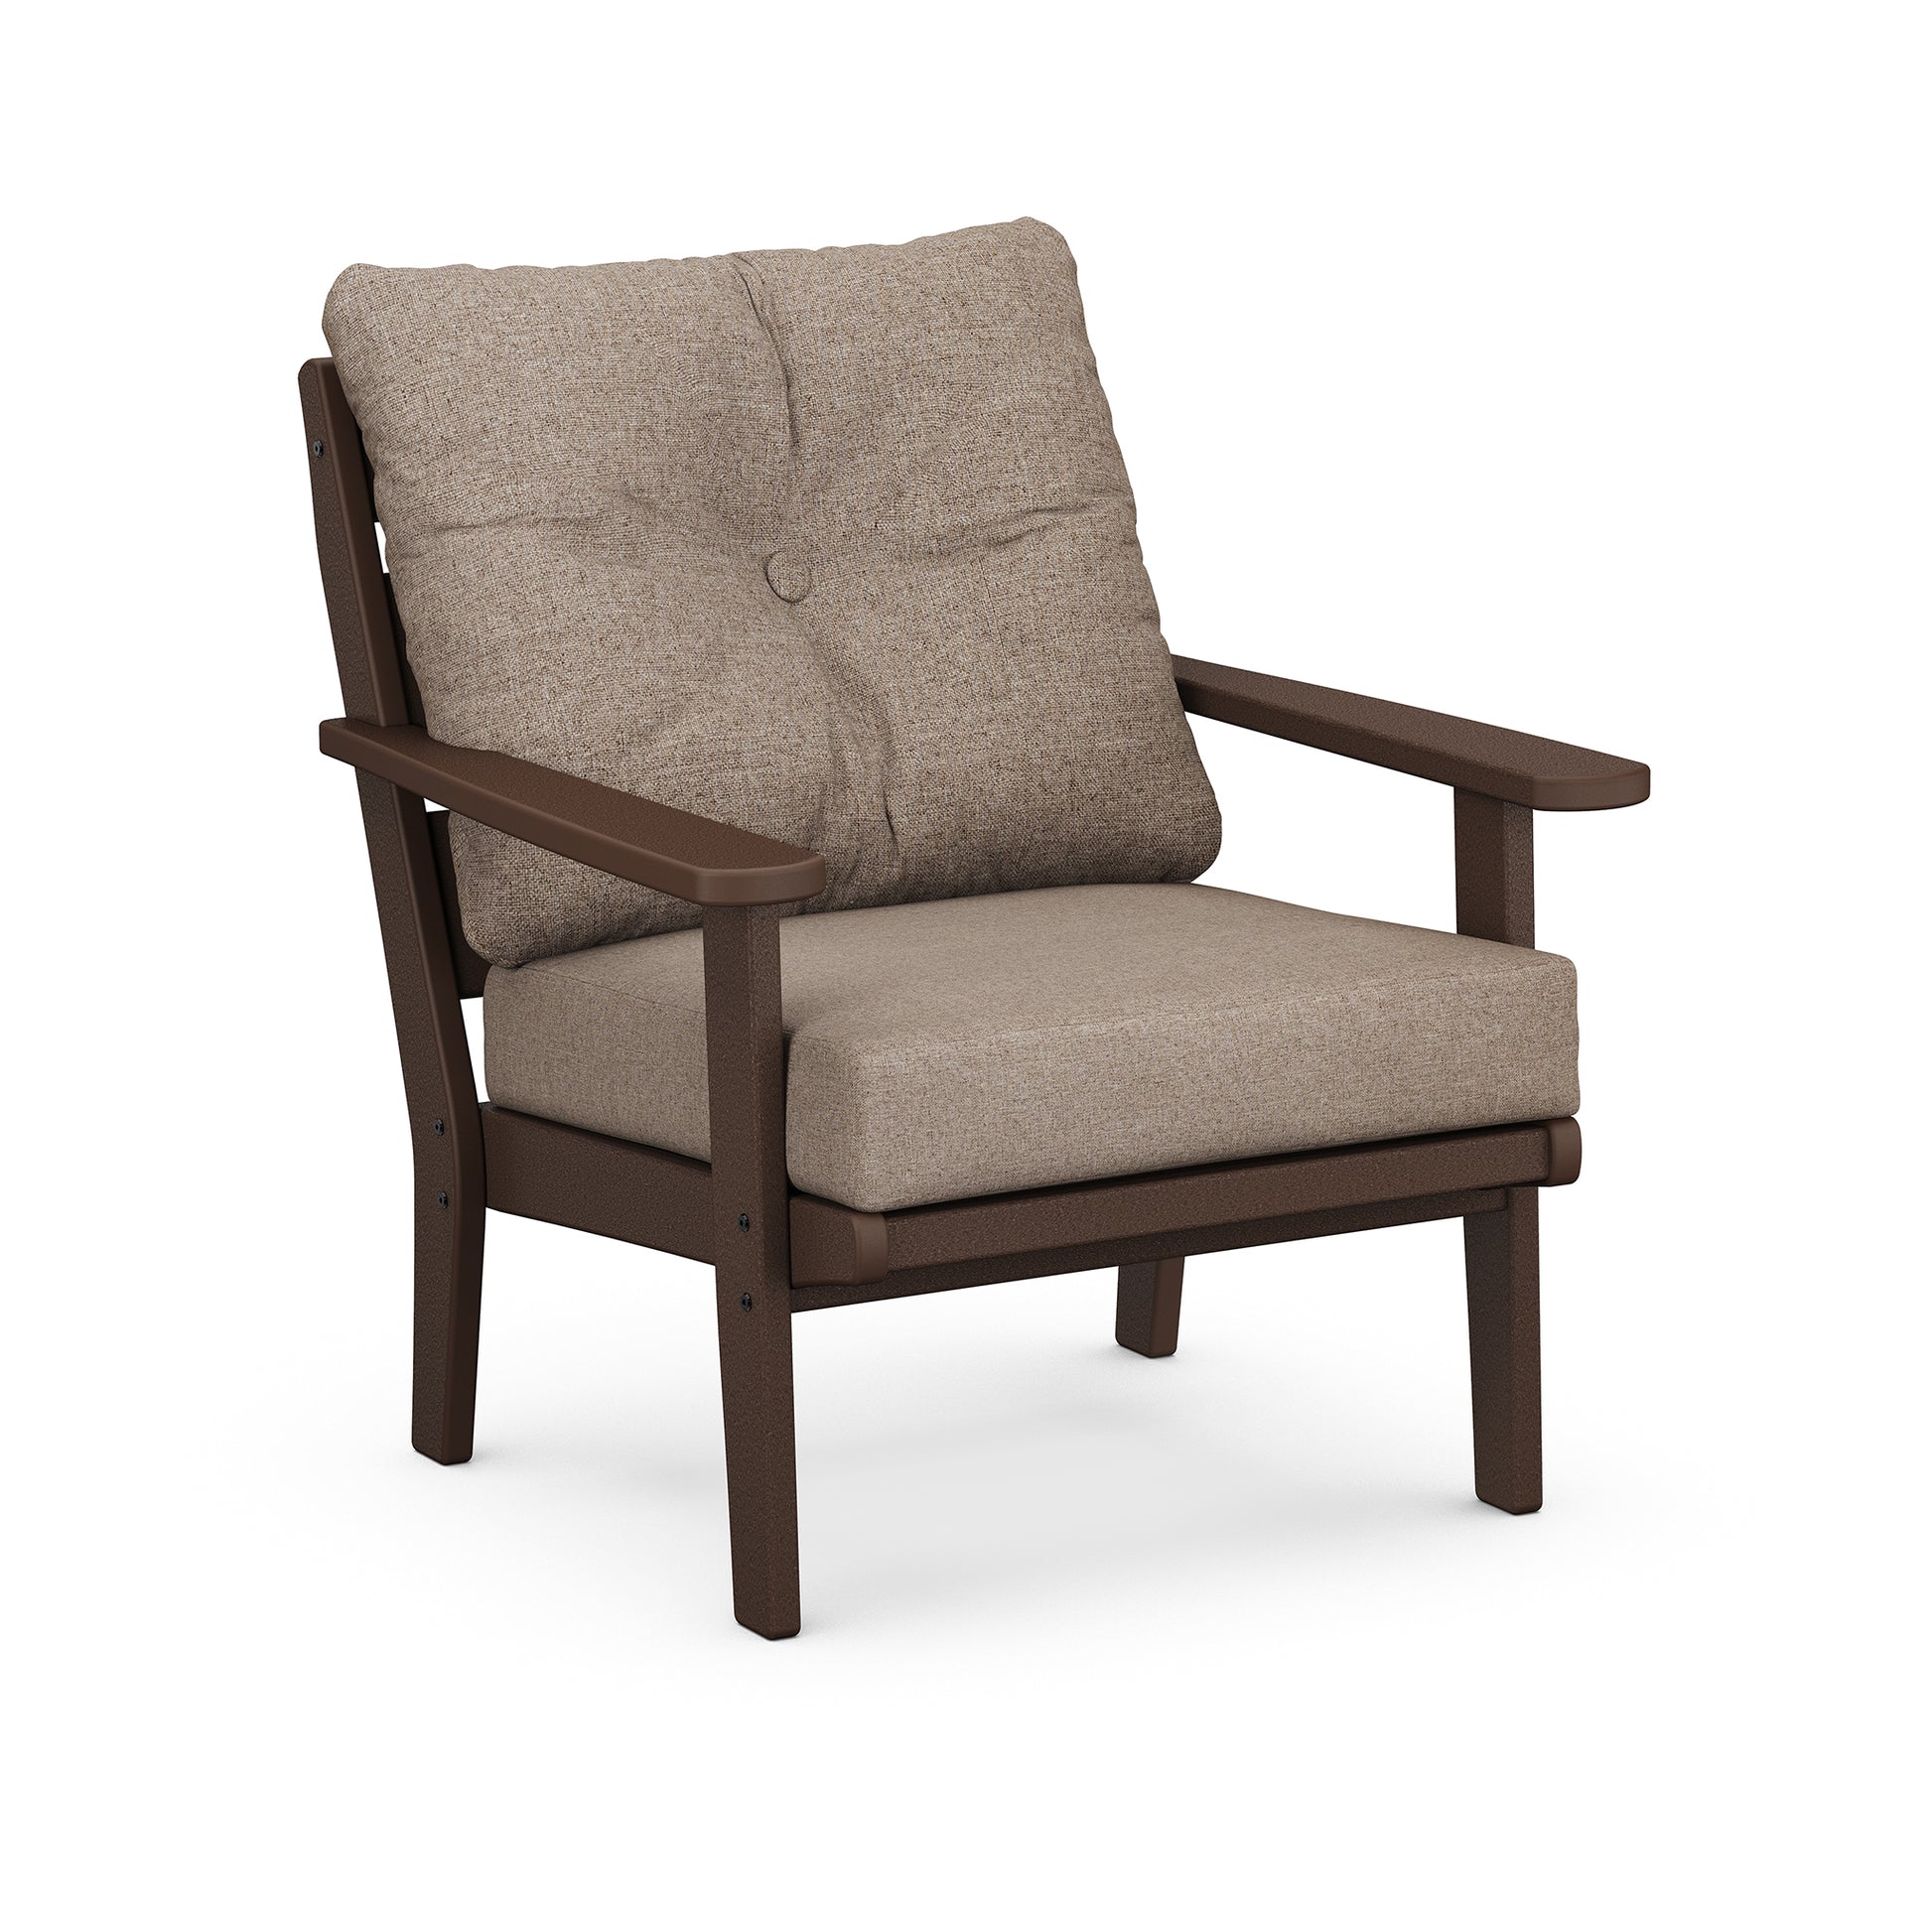 A modern cushioned POLYWOOD Lakeside Deep Seating Chair with beige upholstery set against a white background. The chair features tufting on the back cushion and is designed as an all-weather outdoor chair.